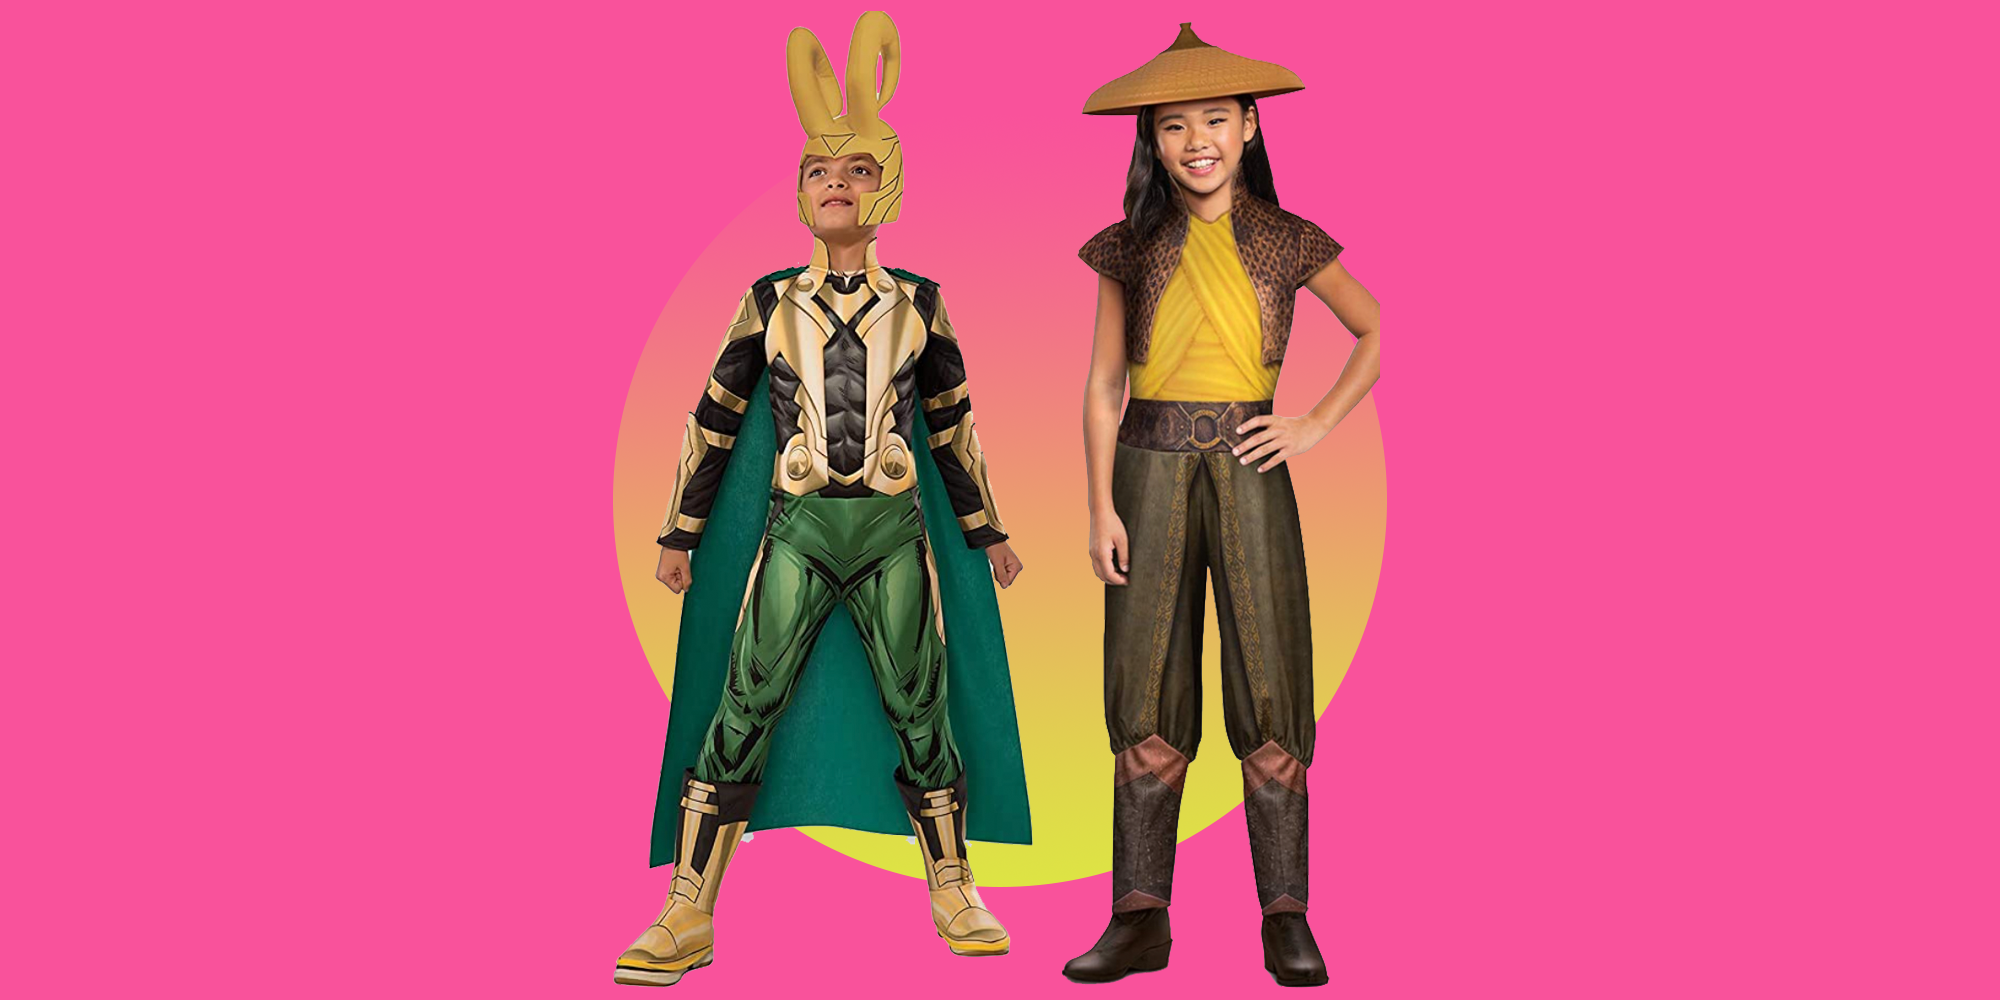 50 Best Disney Family Costumes 2021 - Disney Halloween Costume Ideas for  All Ages